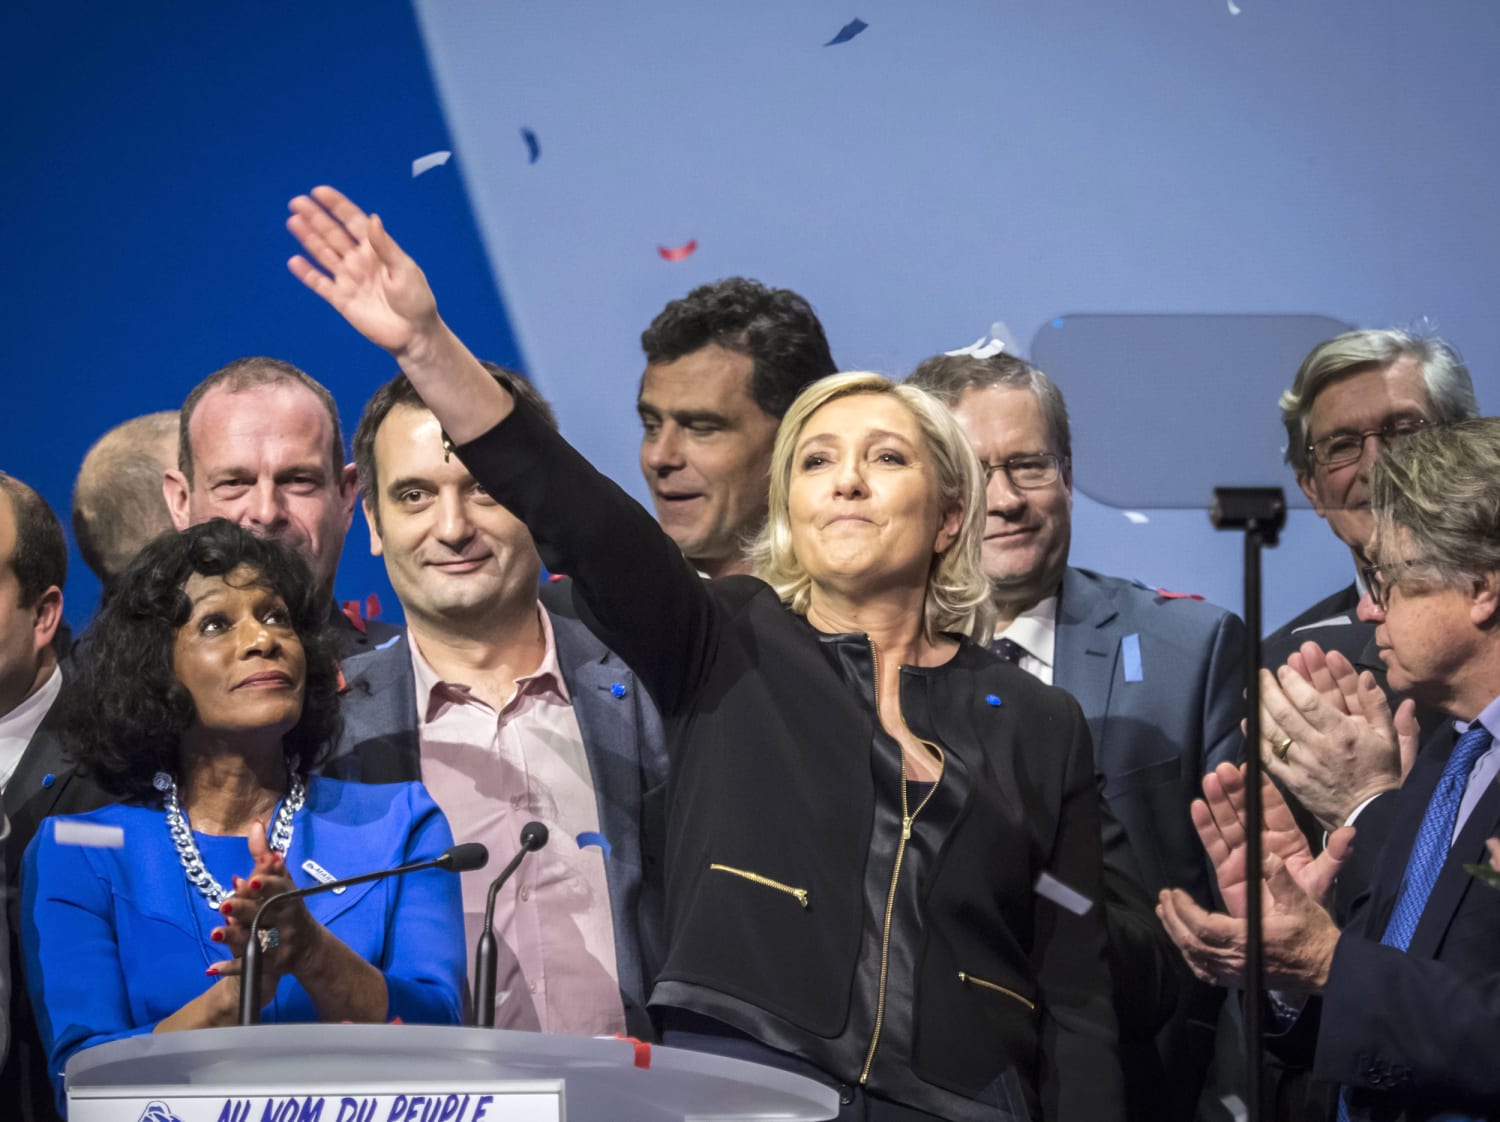 France's Le Pen Launches Election Bid With Vow to Fight Globalization